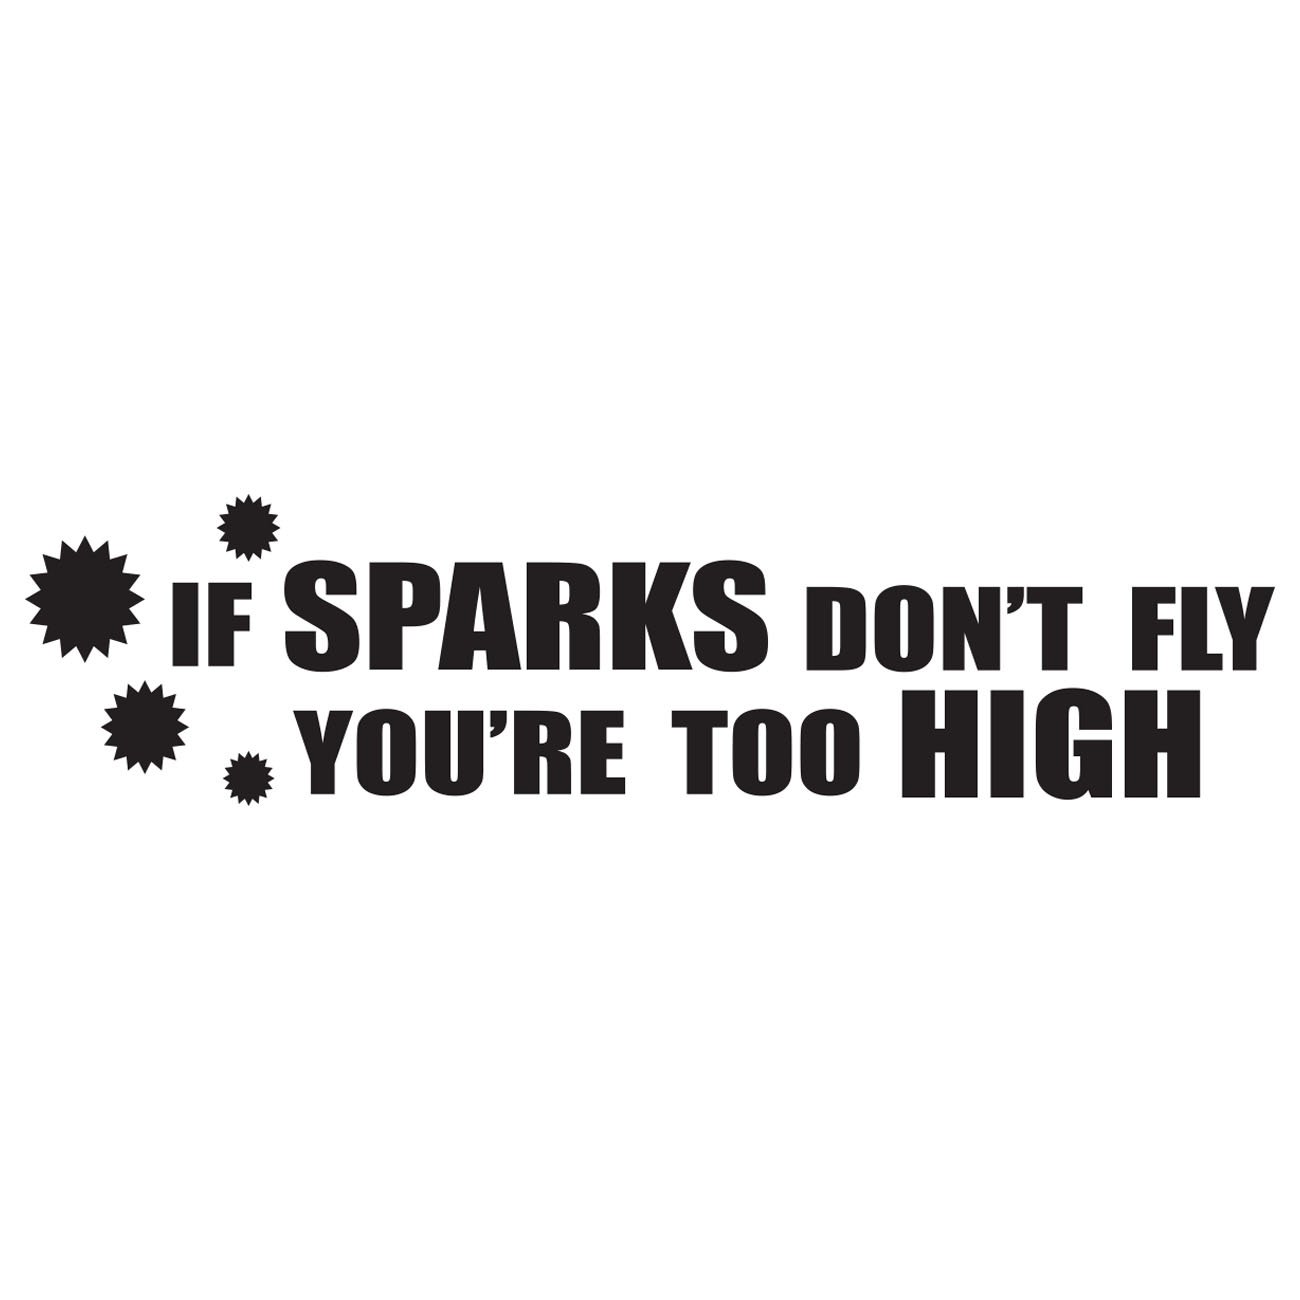 If sparks dont fly - Your too high! 2